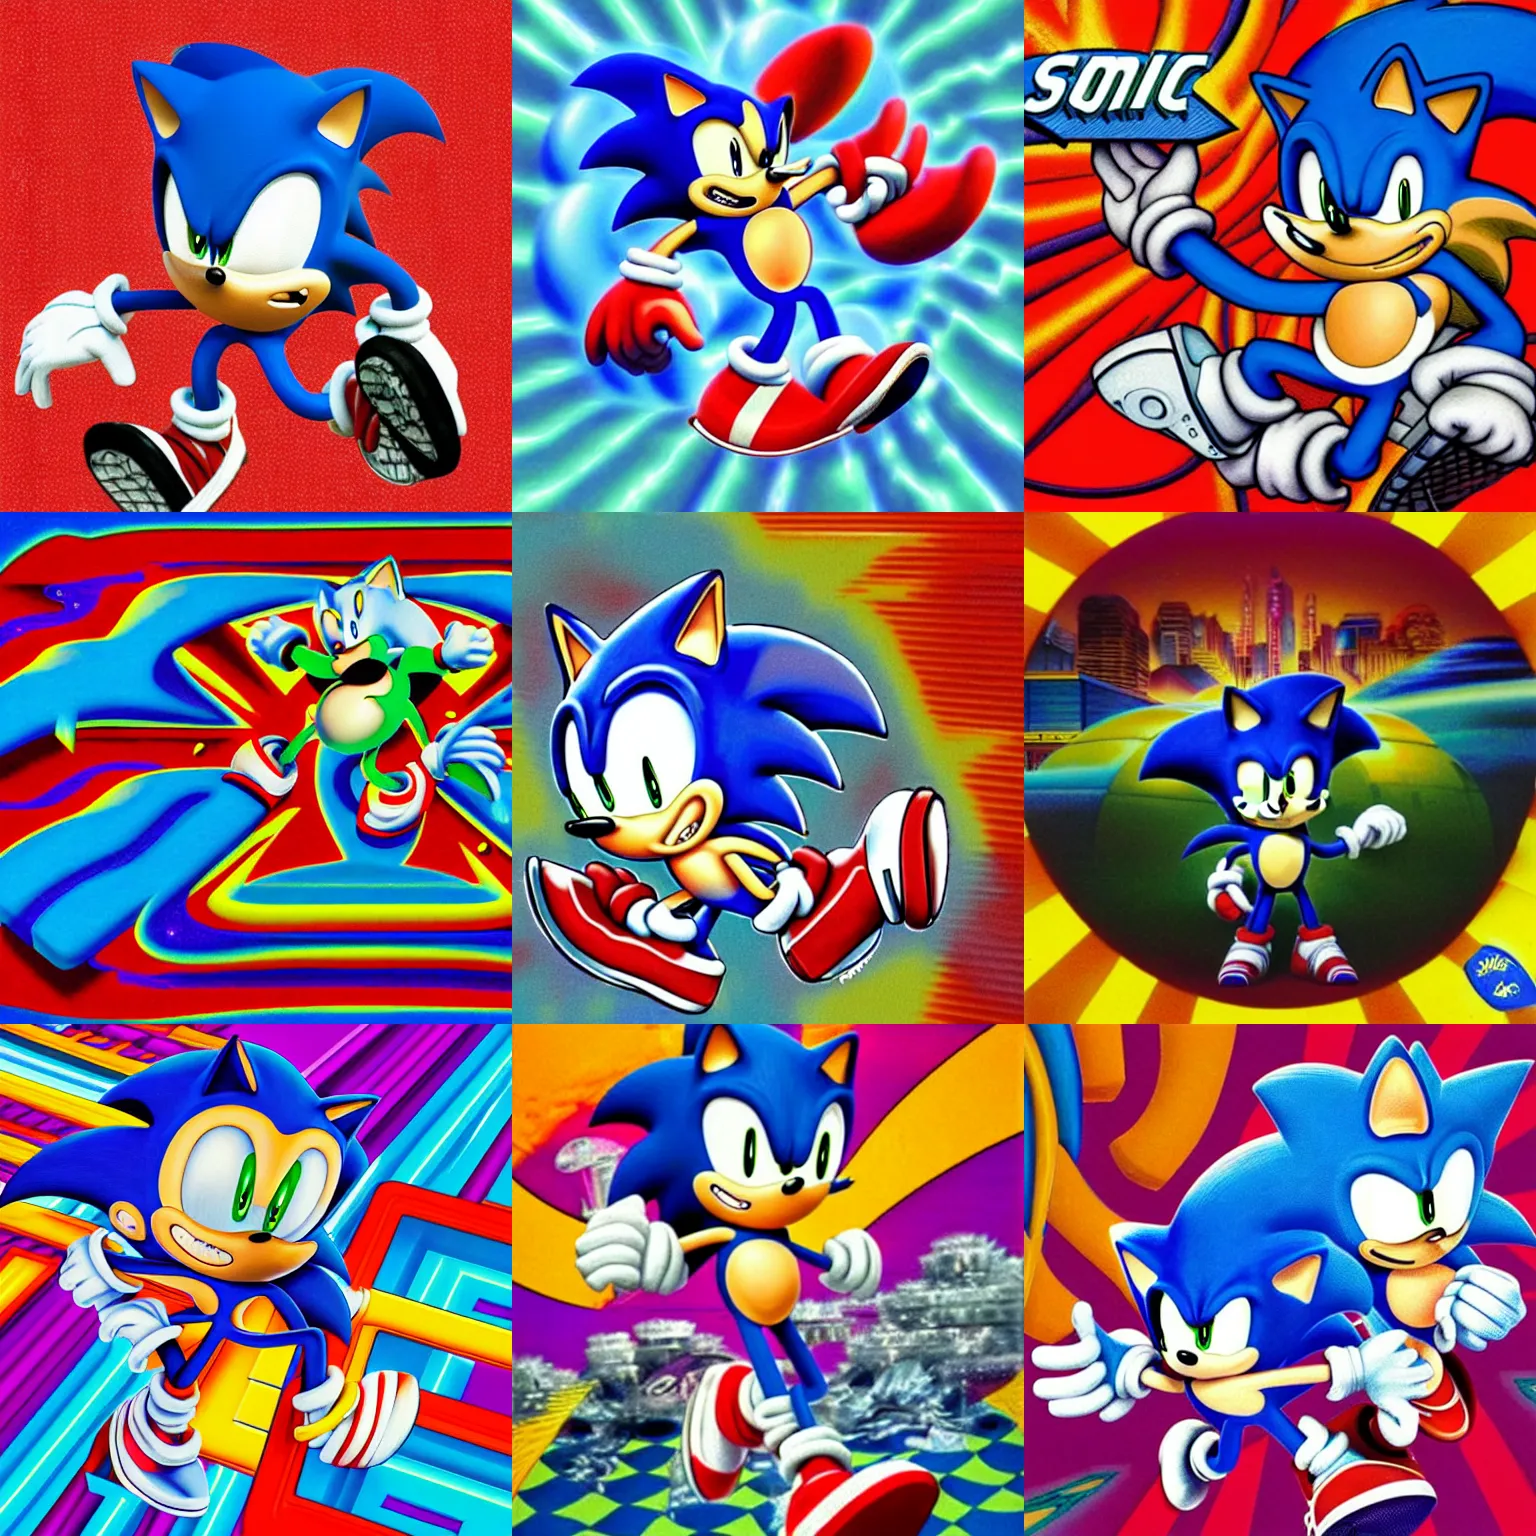 Prompt: retro game sonic advertisement in a surreal, faded, detailed professional, totally radical, high quality airbrush art shpongle album cover of a liquid dissolving lsd dmt sonic the hedgehog on a flat blue checkerboard plane, 1 9 9 0 s 1 9 9 2 prerendered graphics raytraced phong shaded album cover